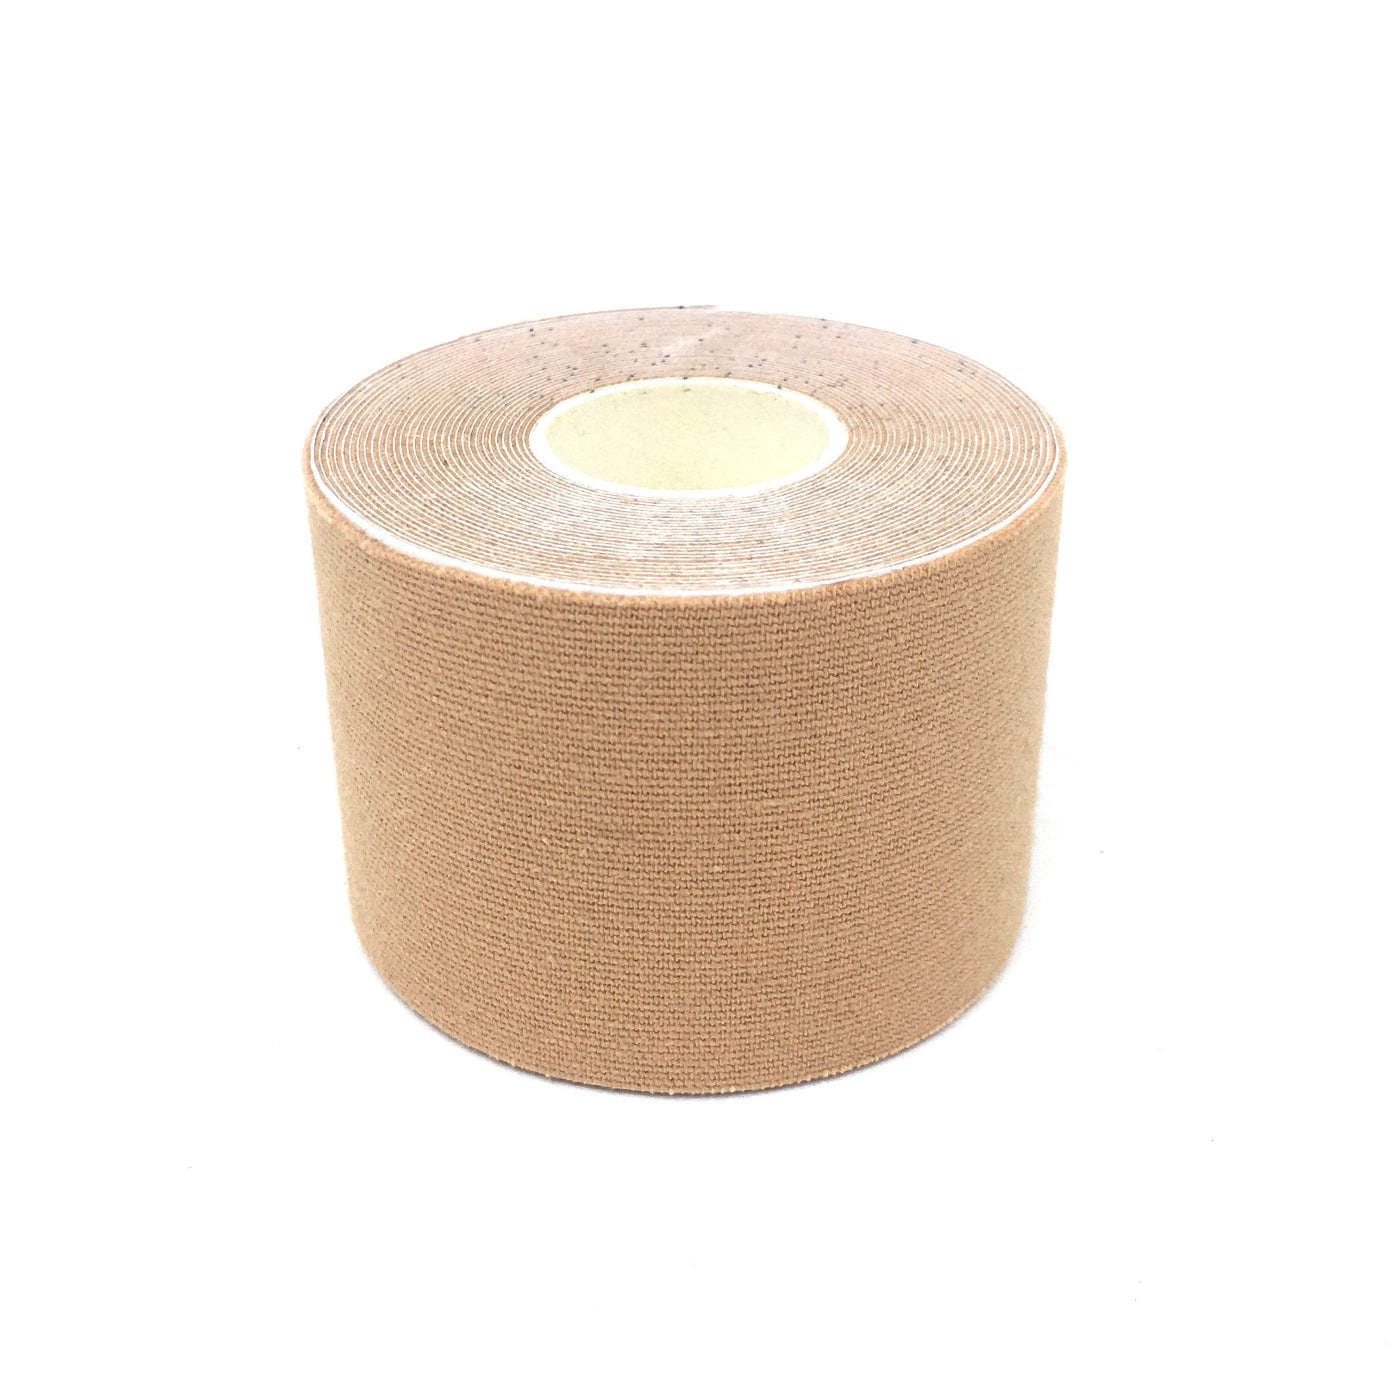 Binder tape - for a safe and comfortable binding